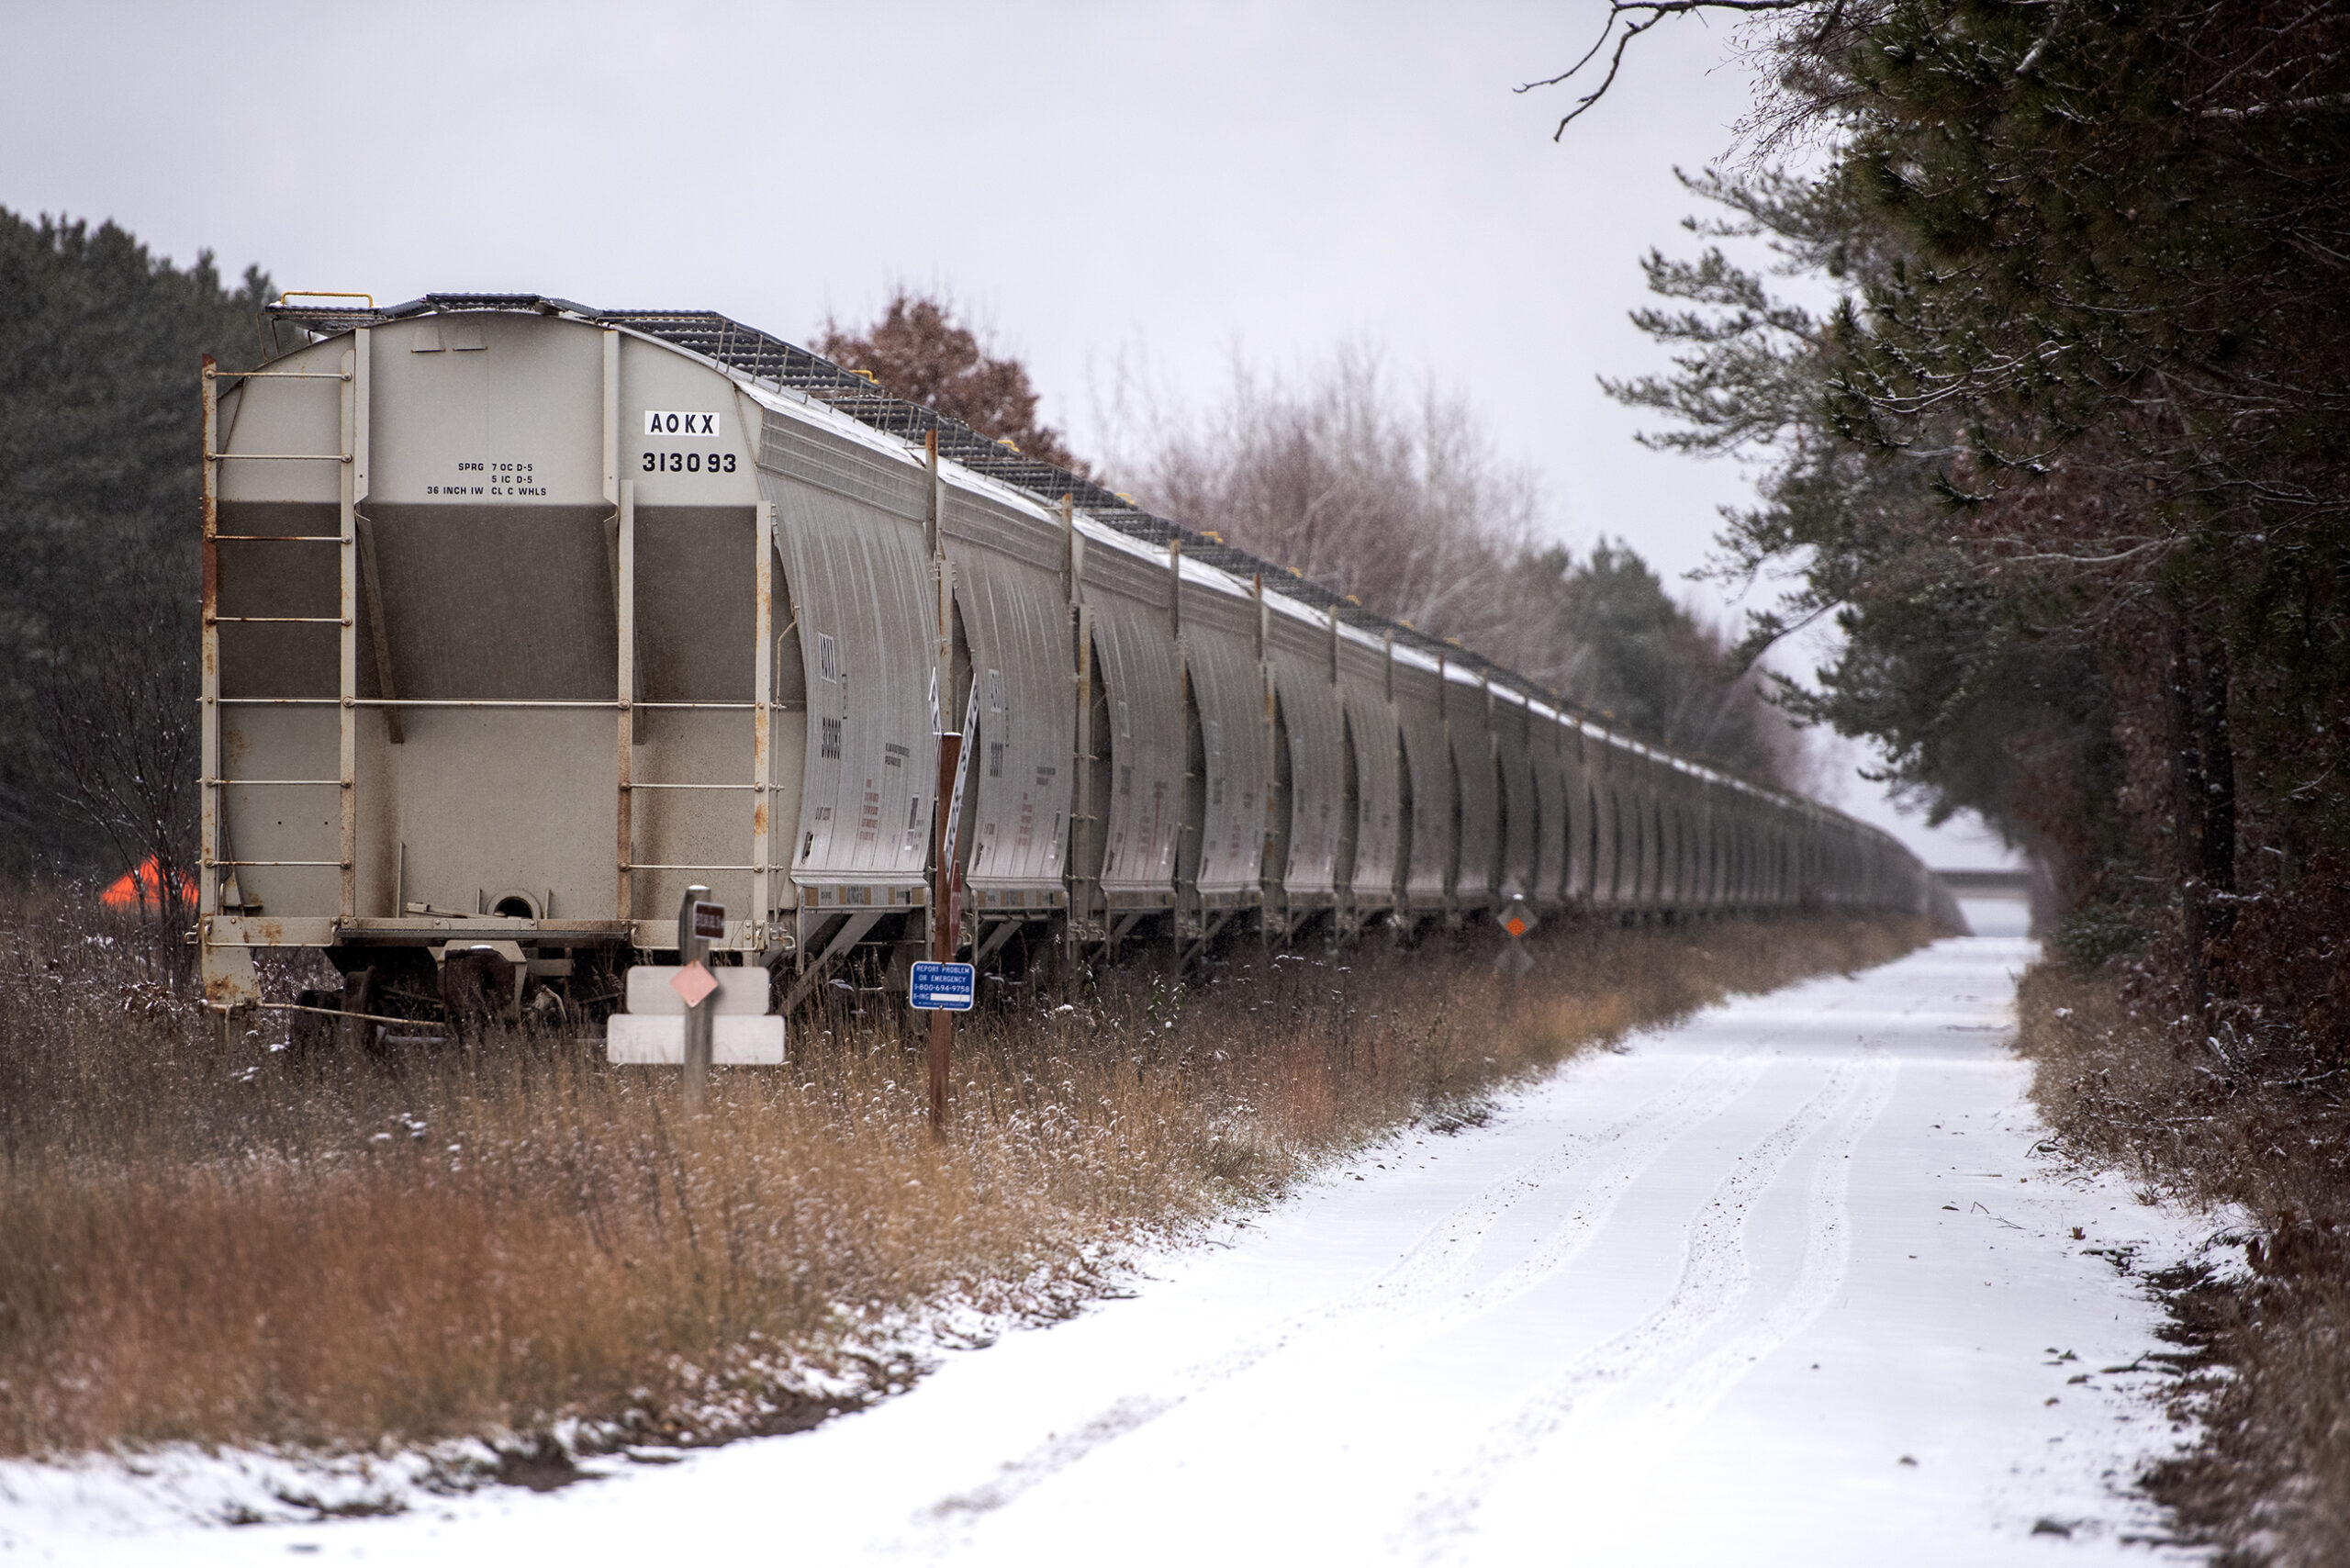 Why is there a long line of railcars parked on the tracks near Spooner?